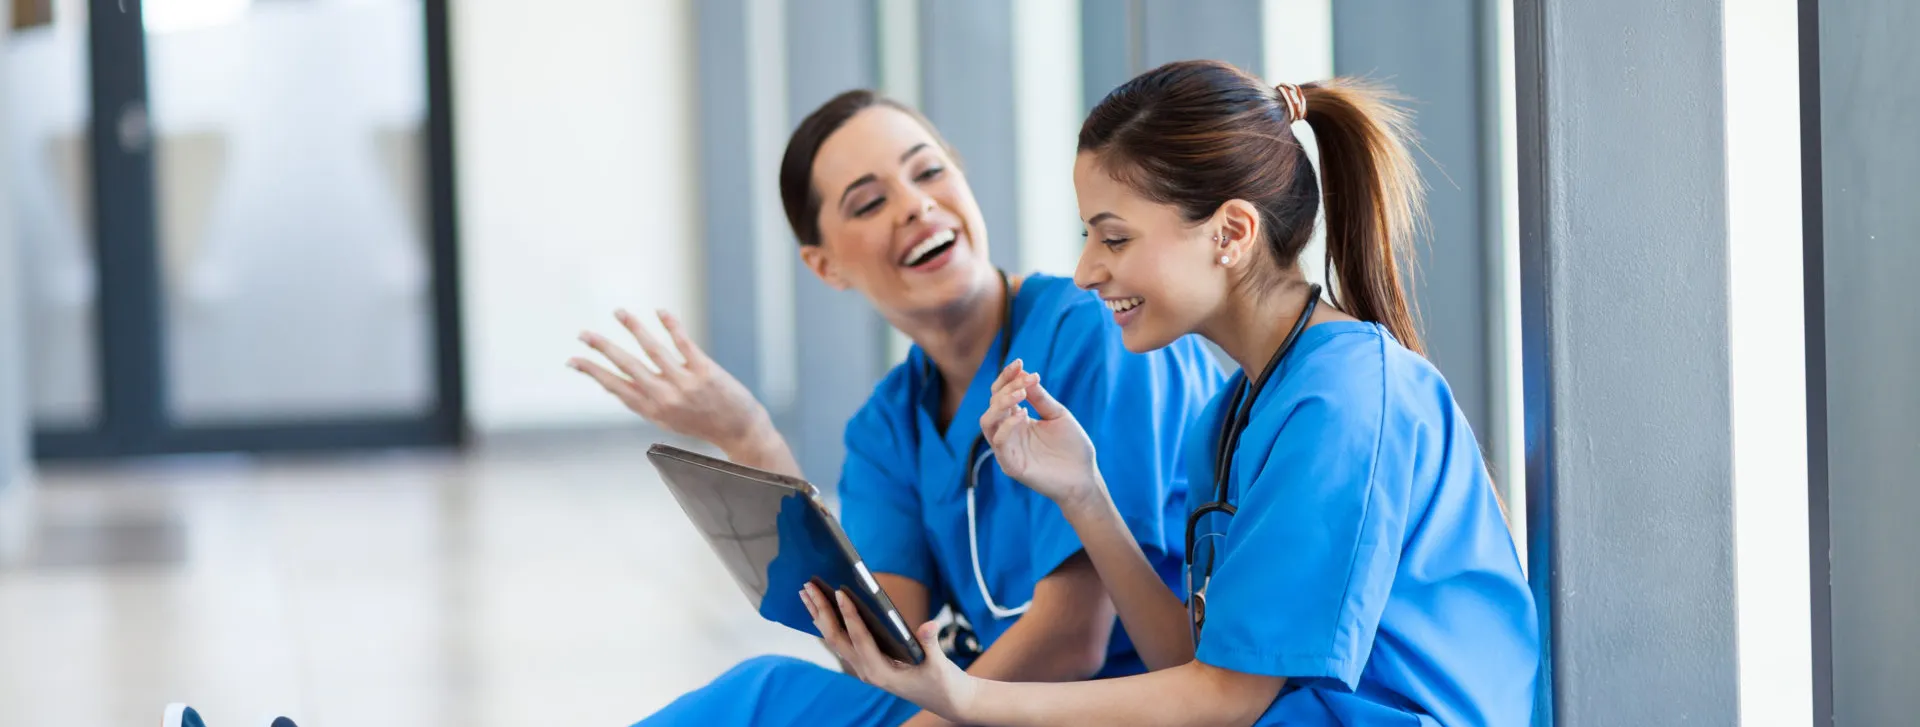 What Can We Do to Promote Professional Socialization in Nursing?